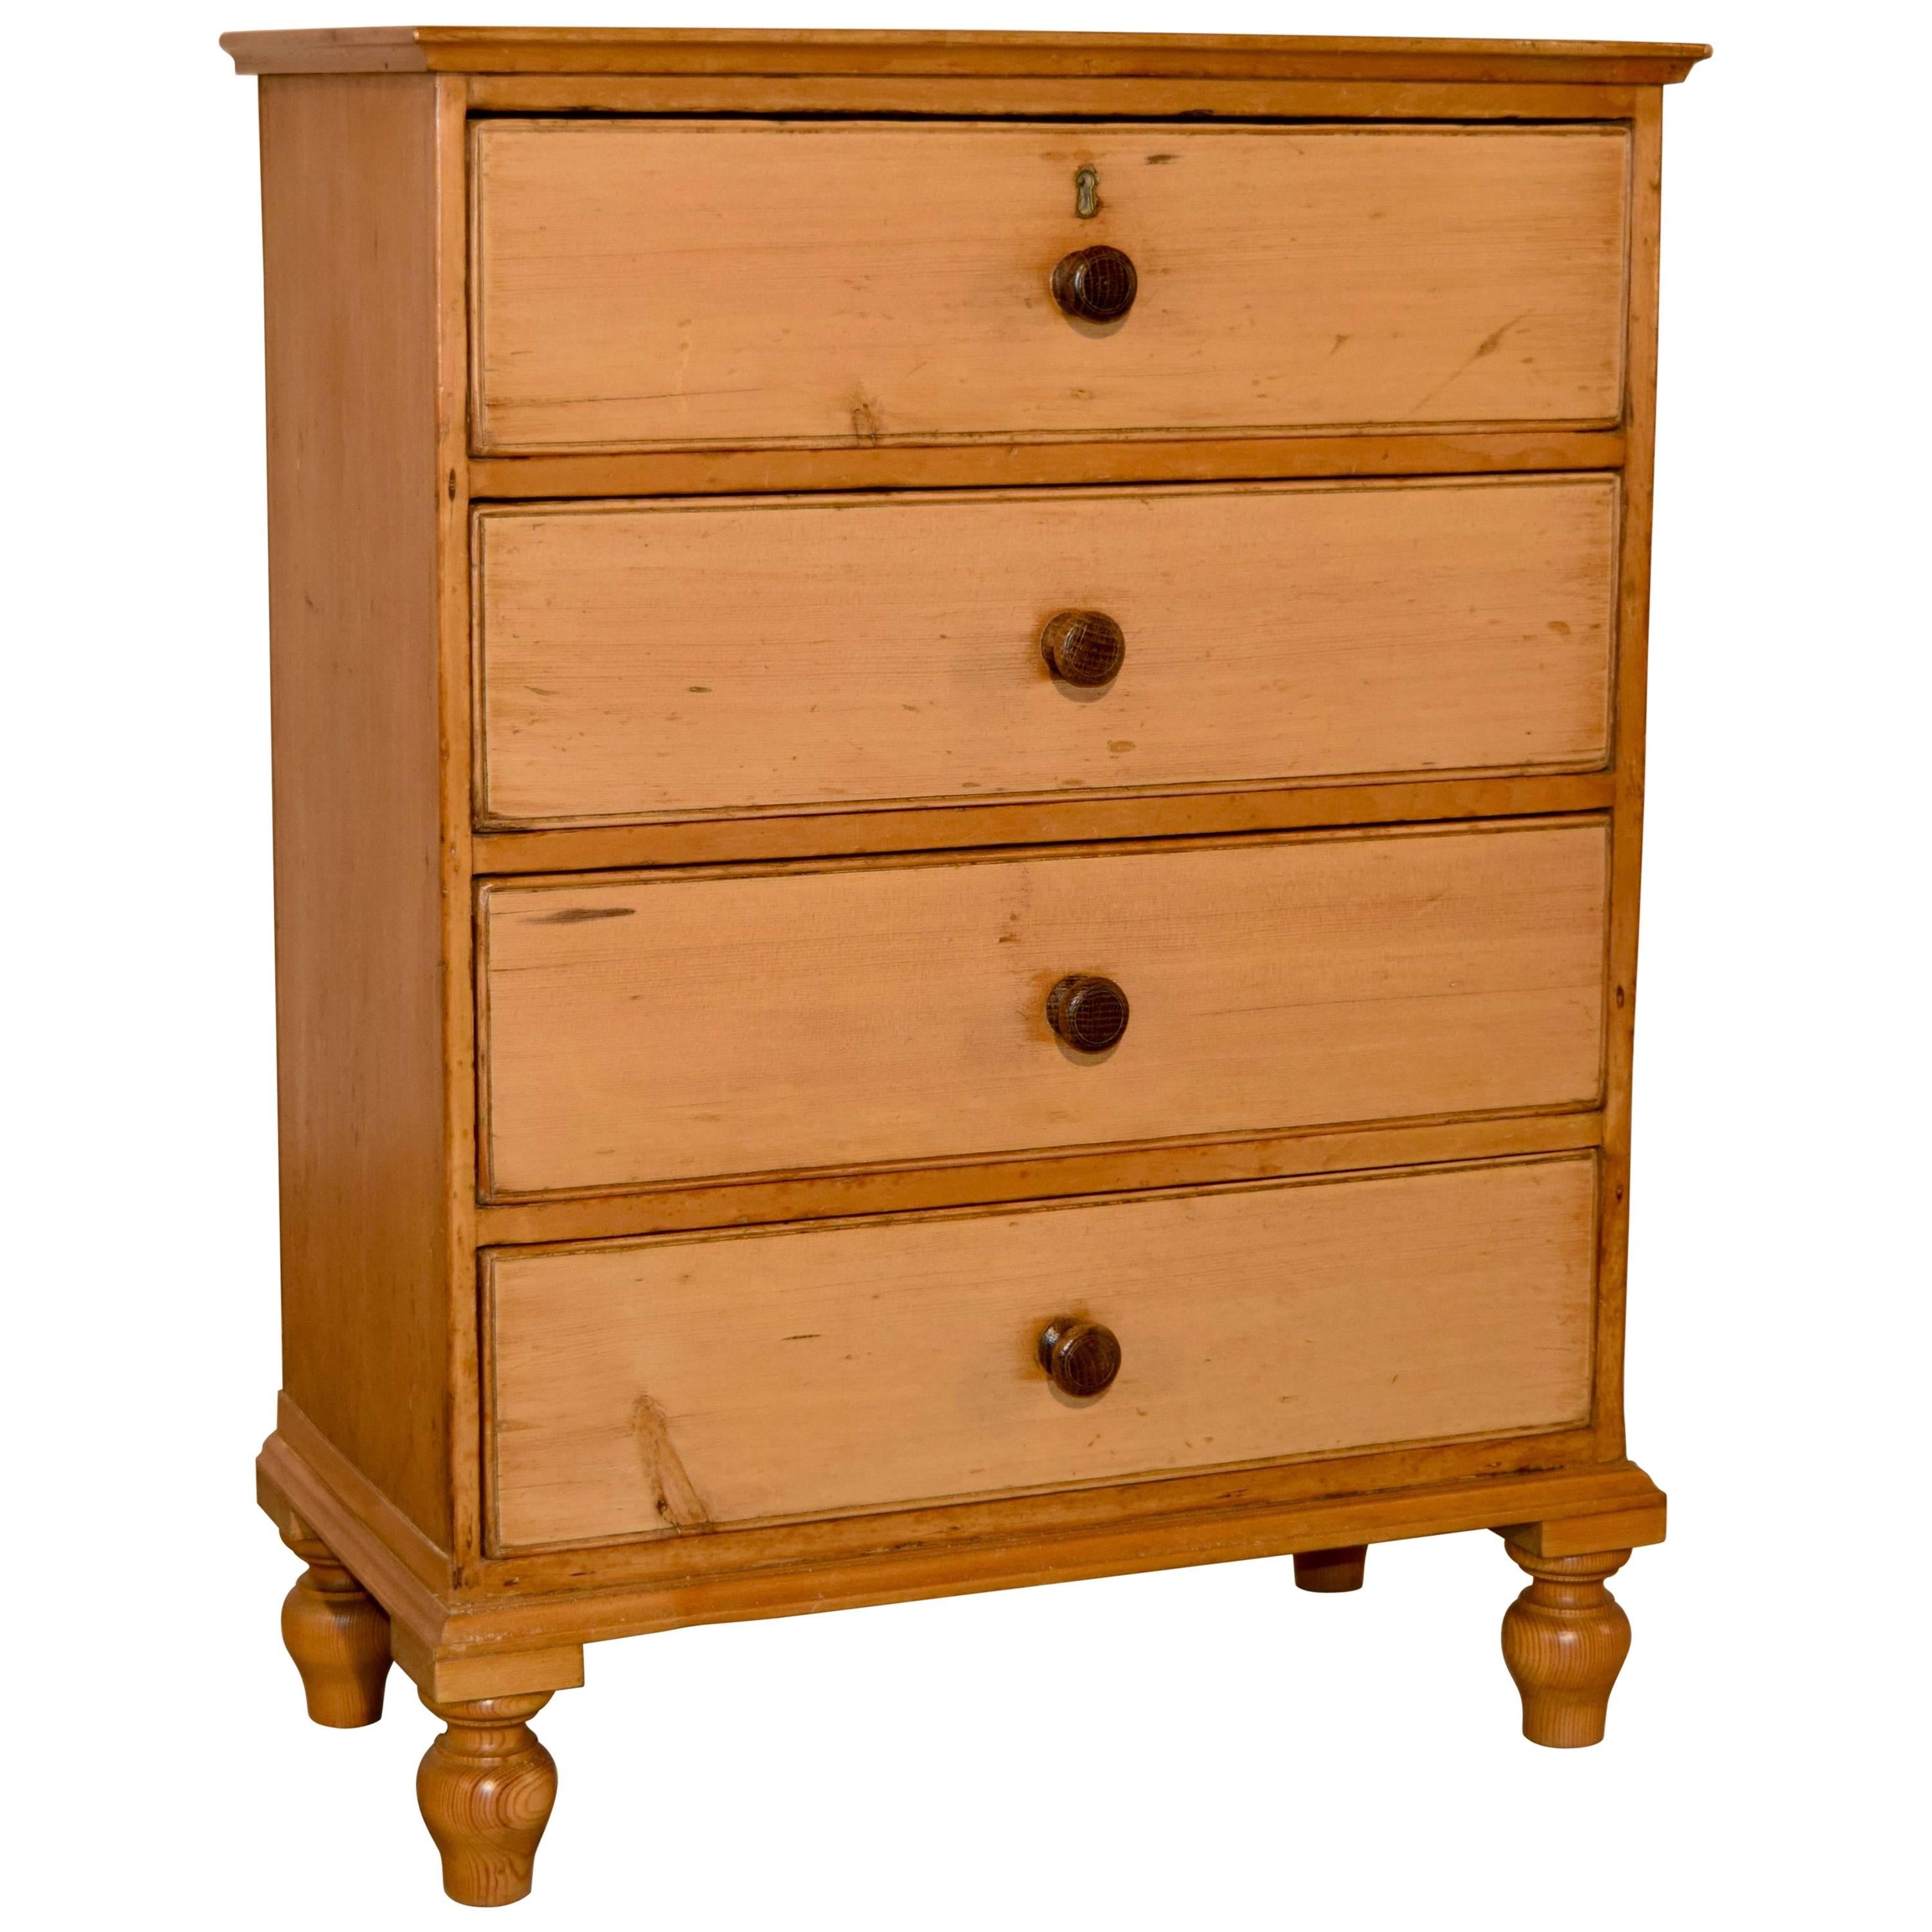 19th Century Small Pine Chest